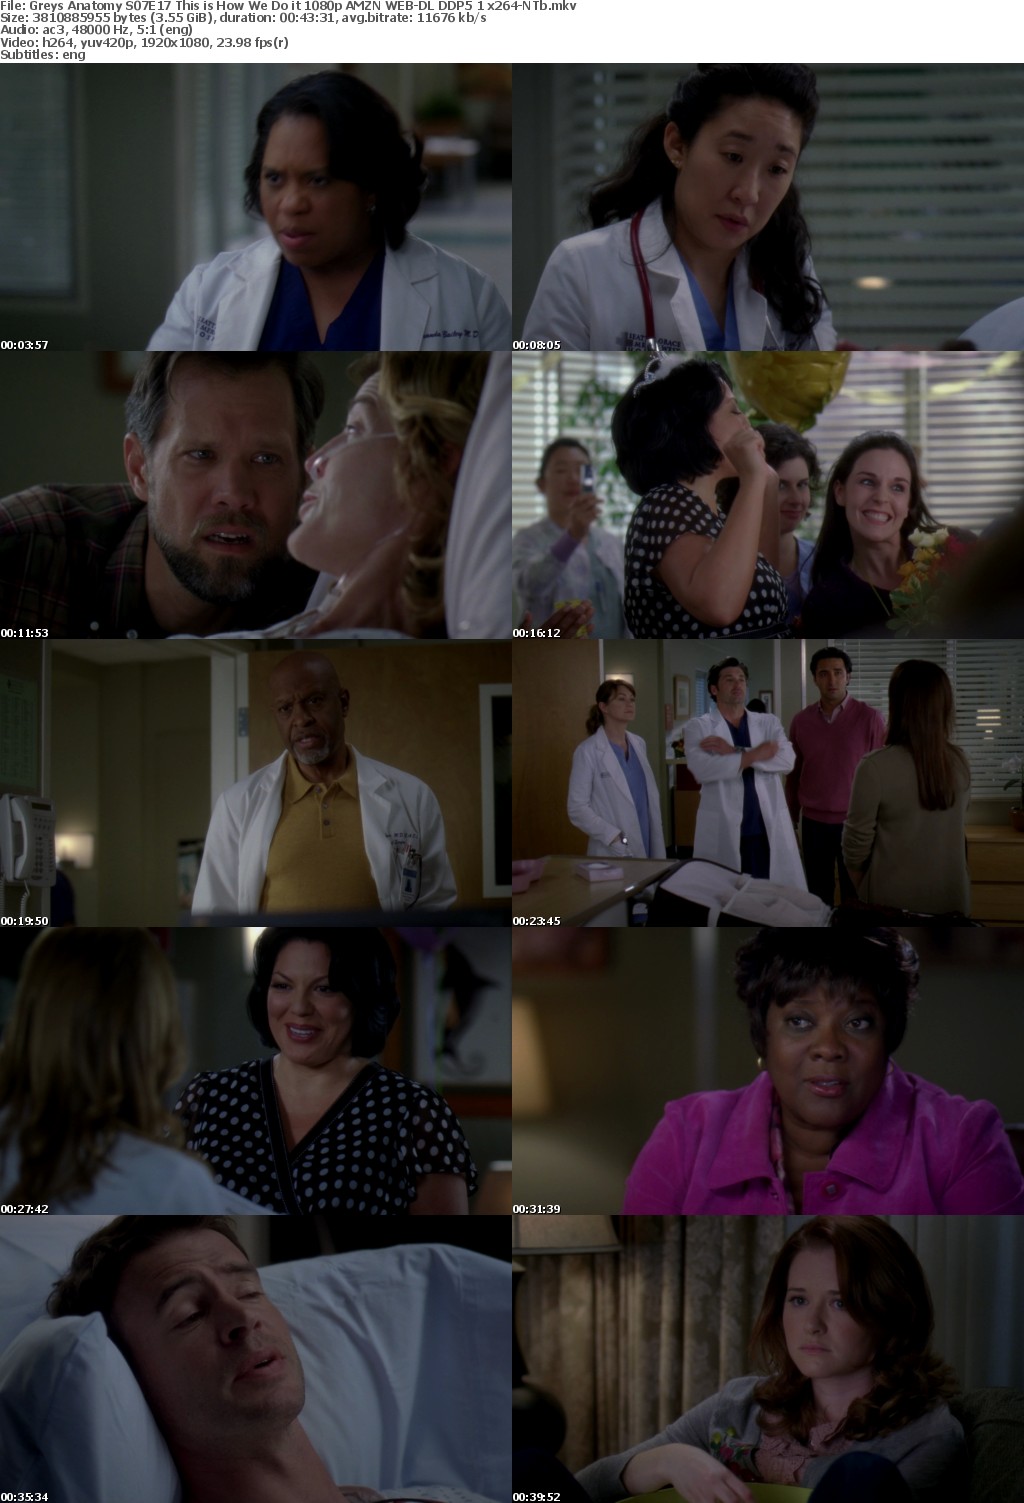 Greys Anatomy S07E17 This is How We Do it 1080p AMZN WEB-DL DDP5 1 x264-NTb